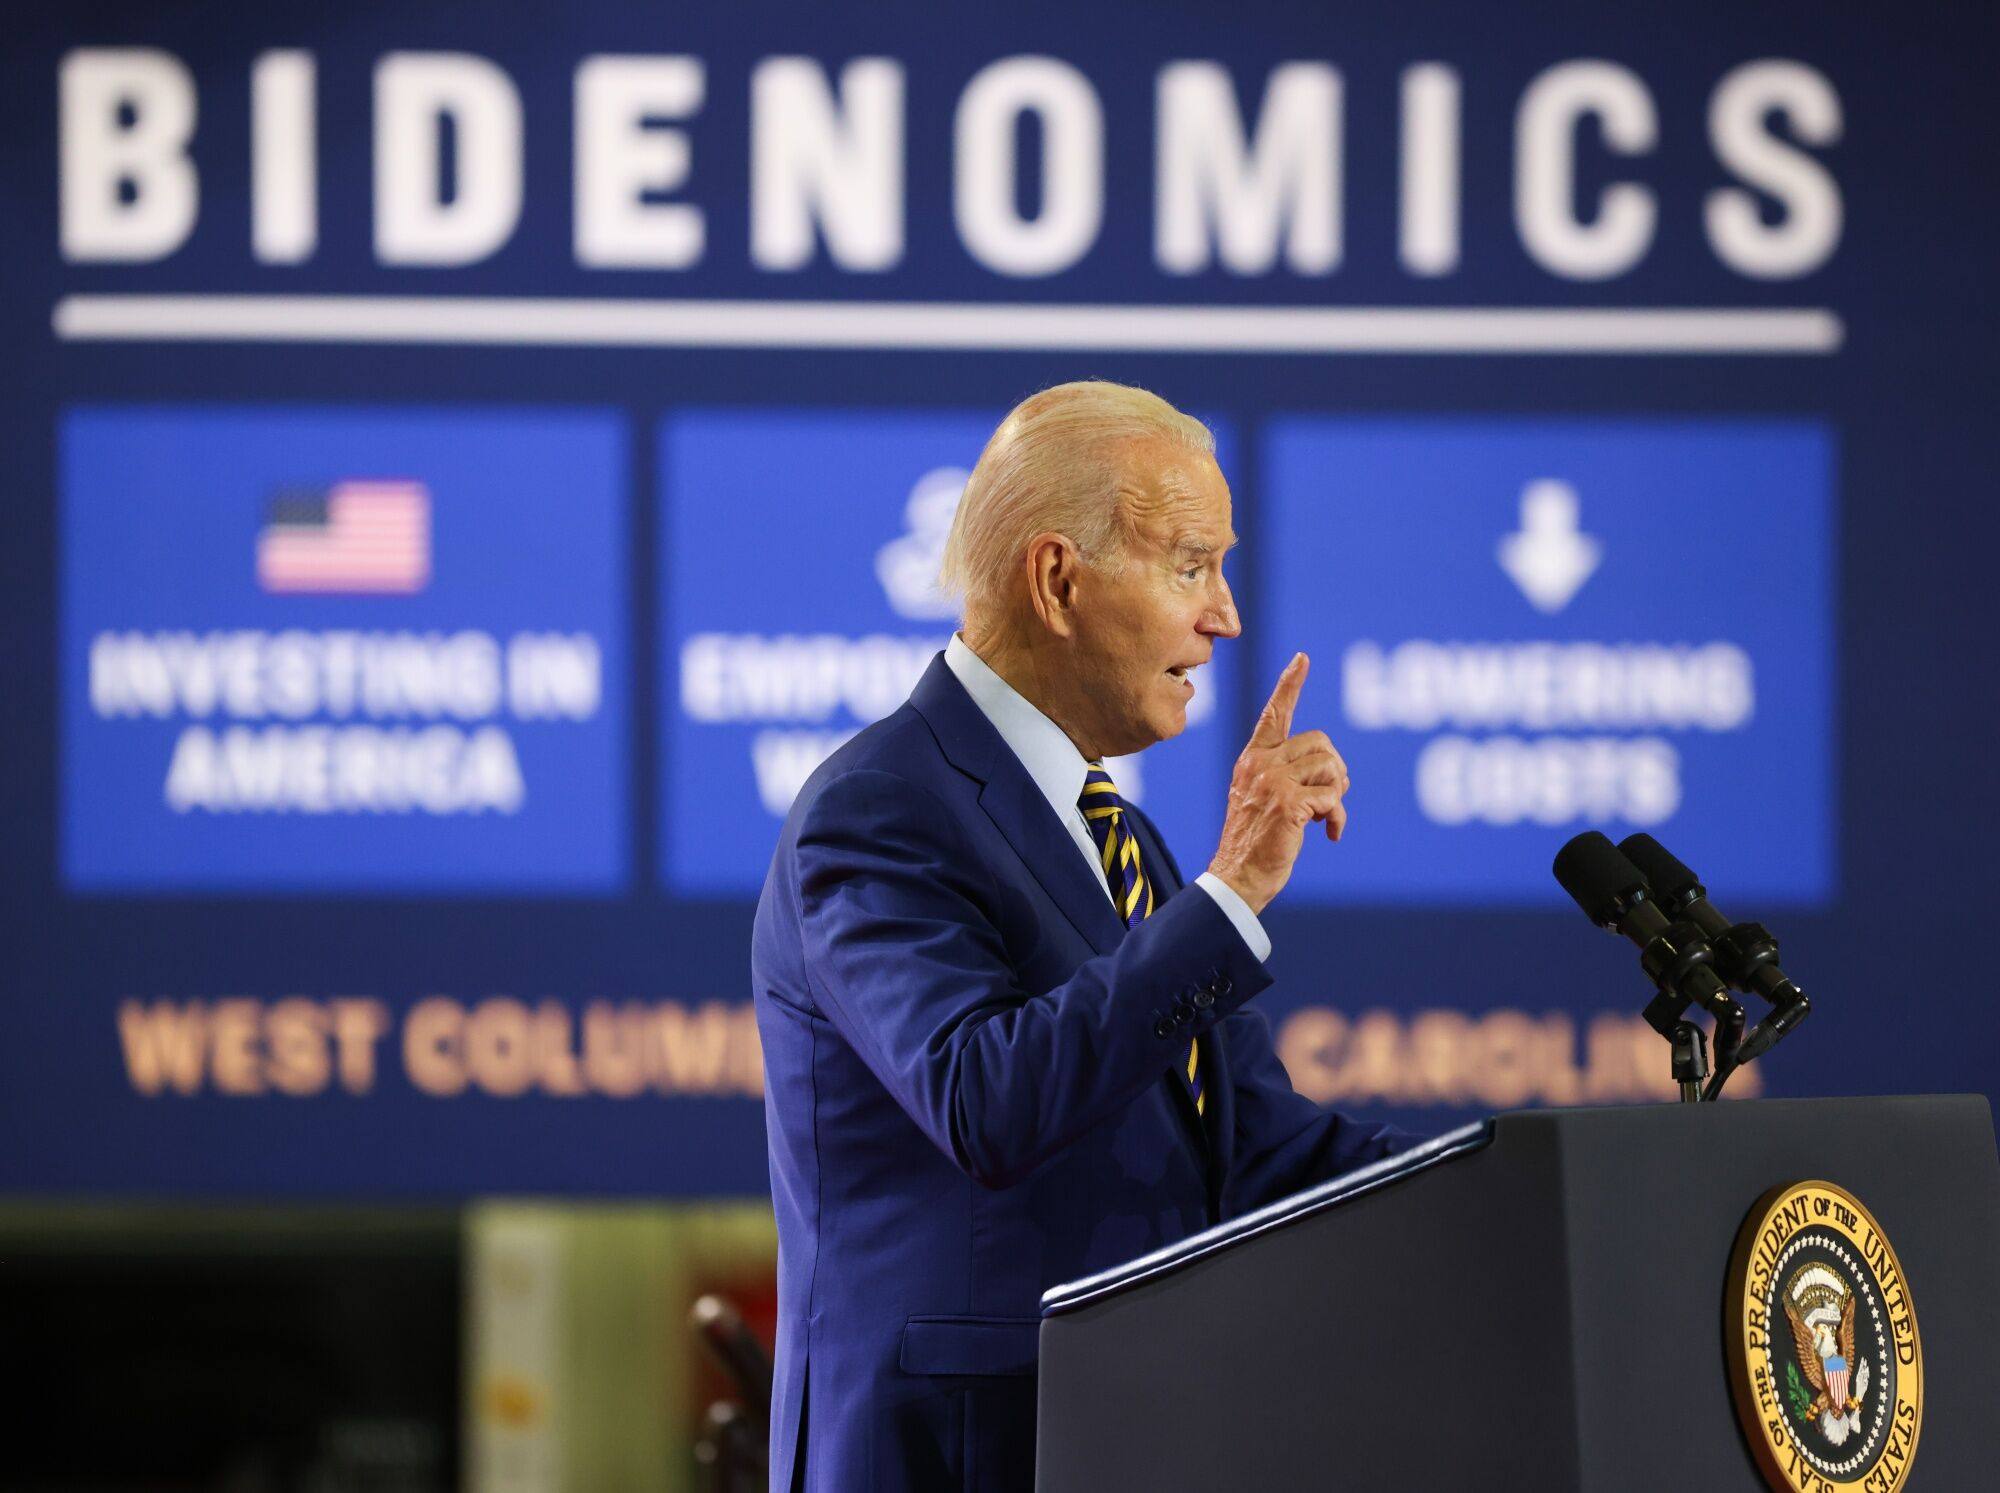 US President Joe Biden talks economic policy at the Flex facility in West Columbia, South Carolina on July 6. Last year, 71 per cent of industrial policy interventions came from advanced economies, with 48 per cent from three alone – China, the EU and the US. Photo: Bloomberg